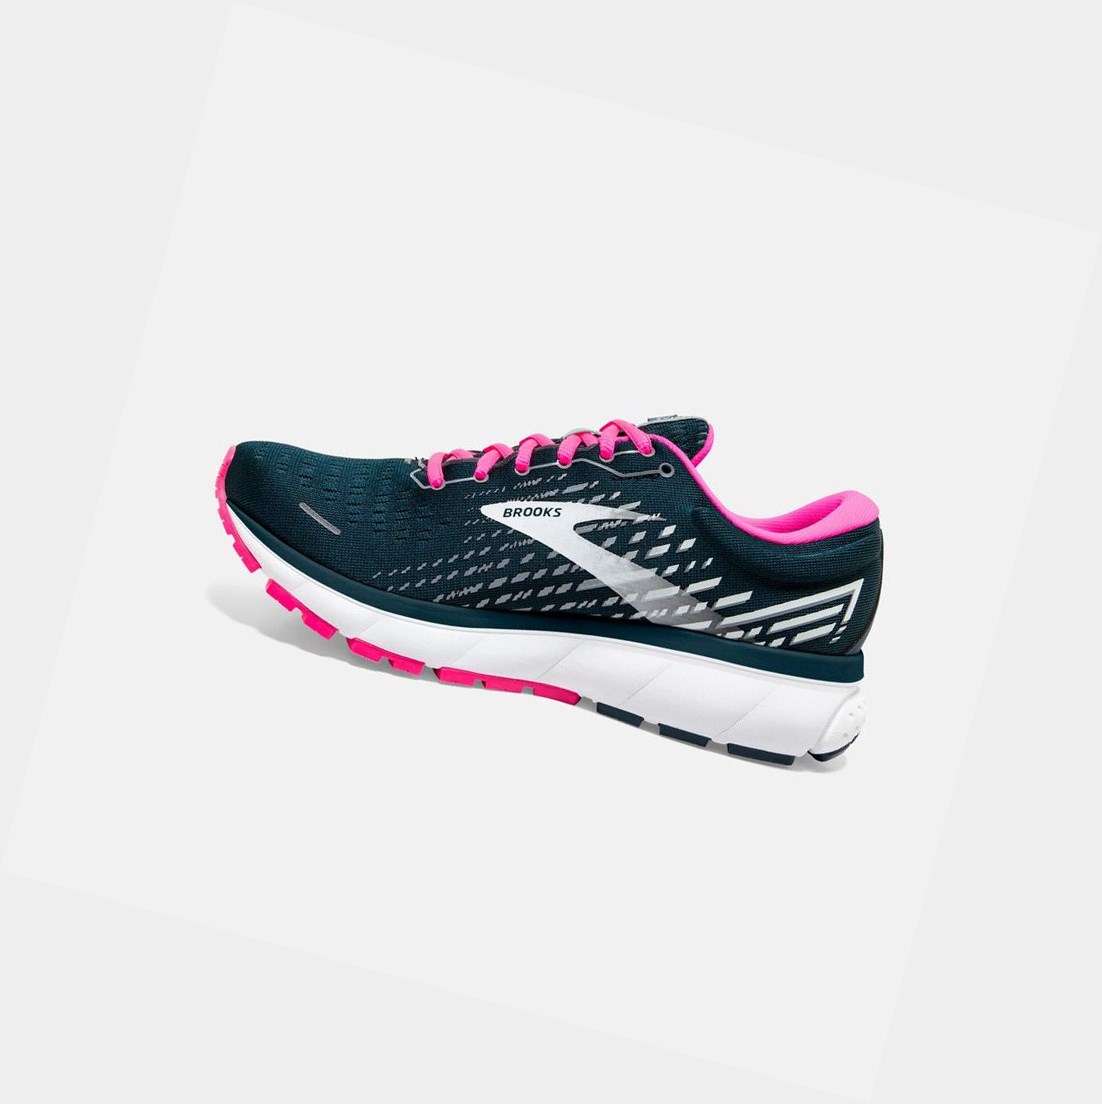 Brooks Ghost 13 Women's Road Running Shoes Reflective Pond / Pink / Ice | VTGH-08956